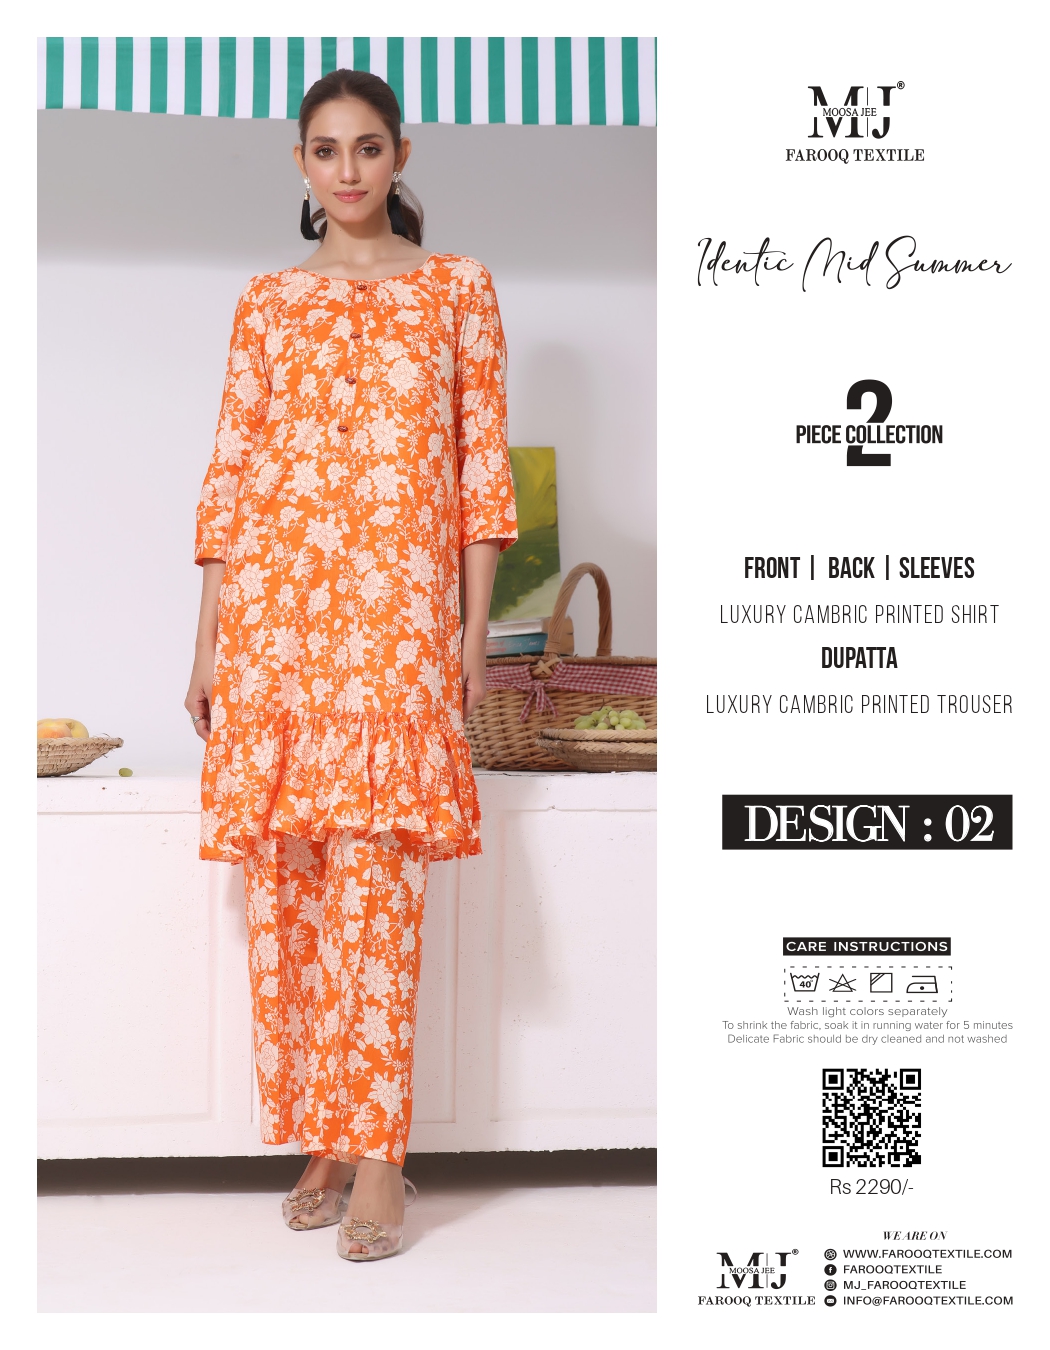 MJ 2pc Inlys by Farooq textile_page-0002